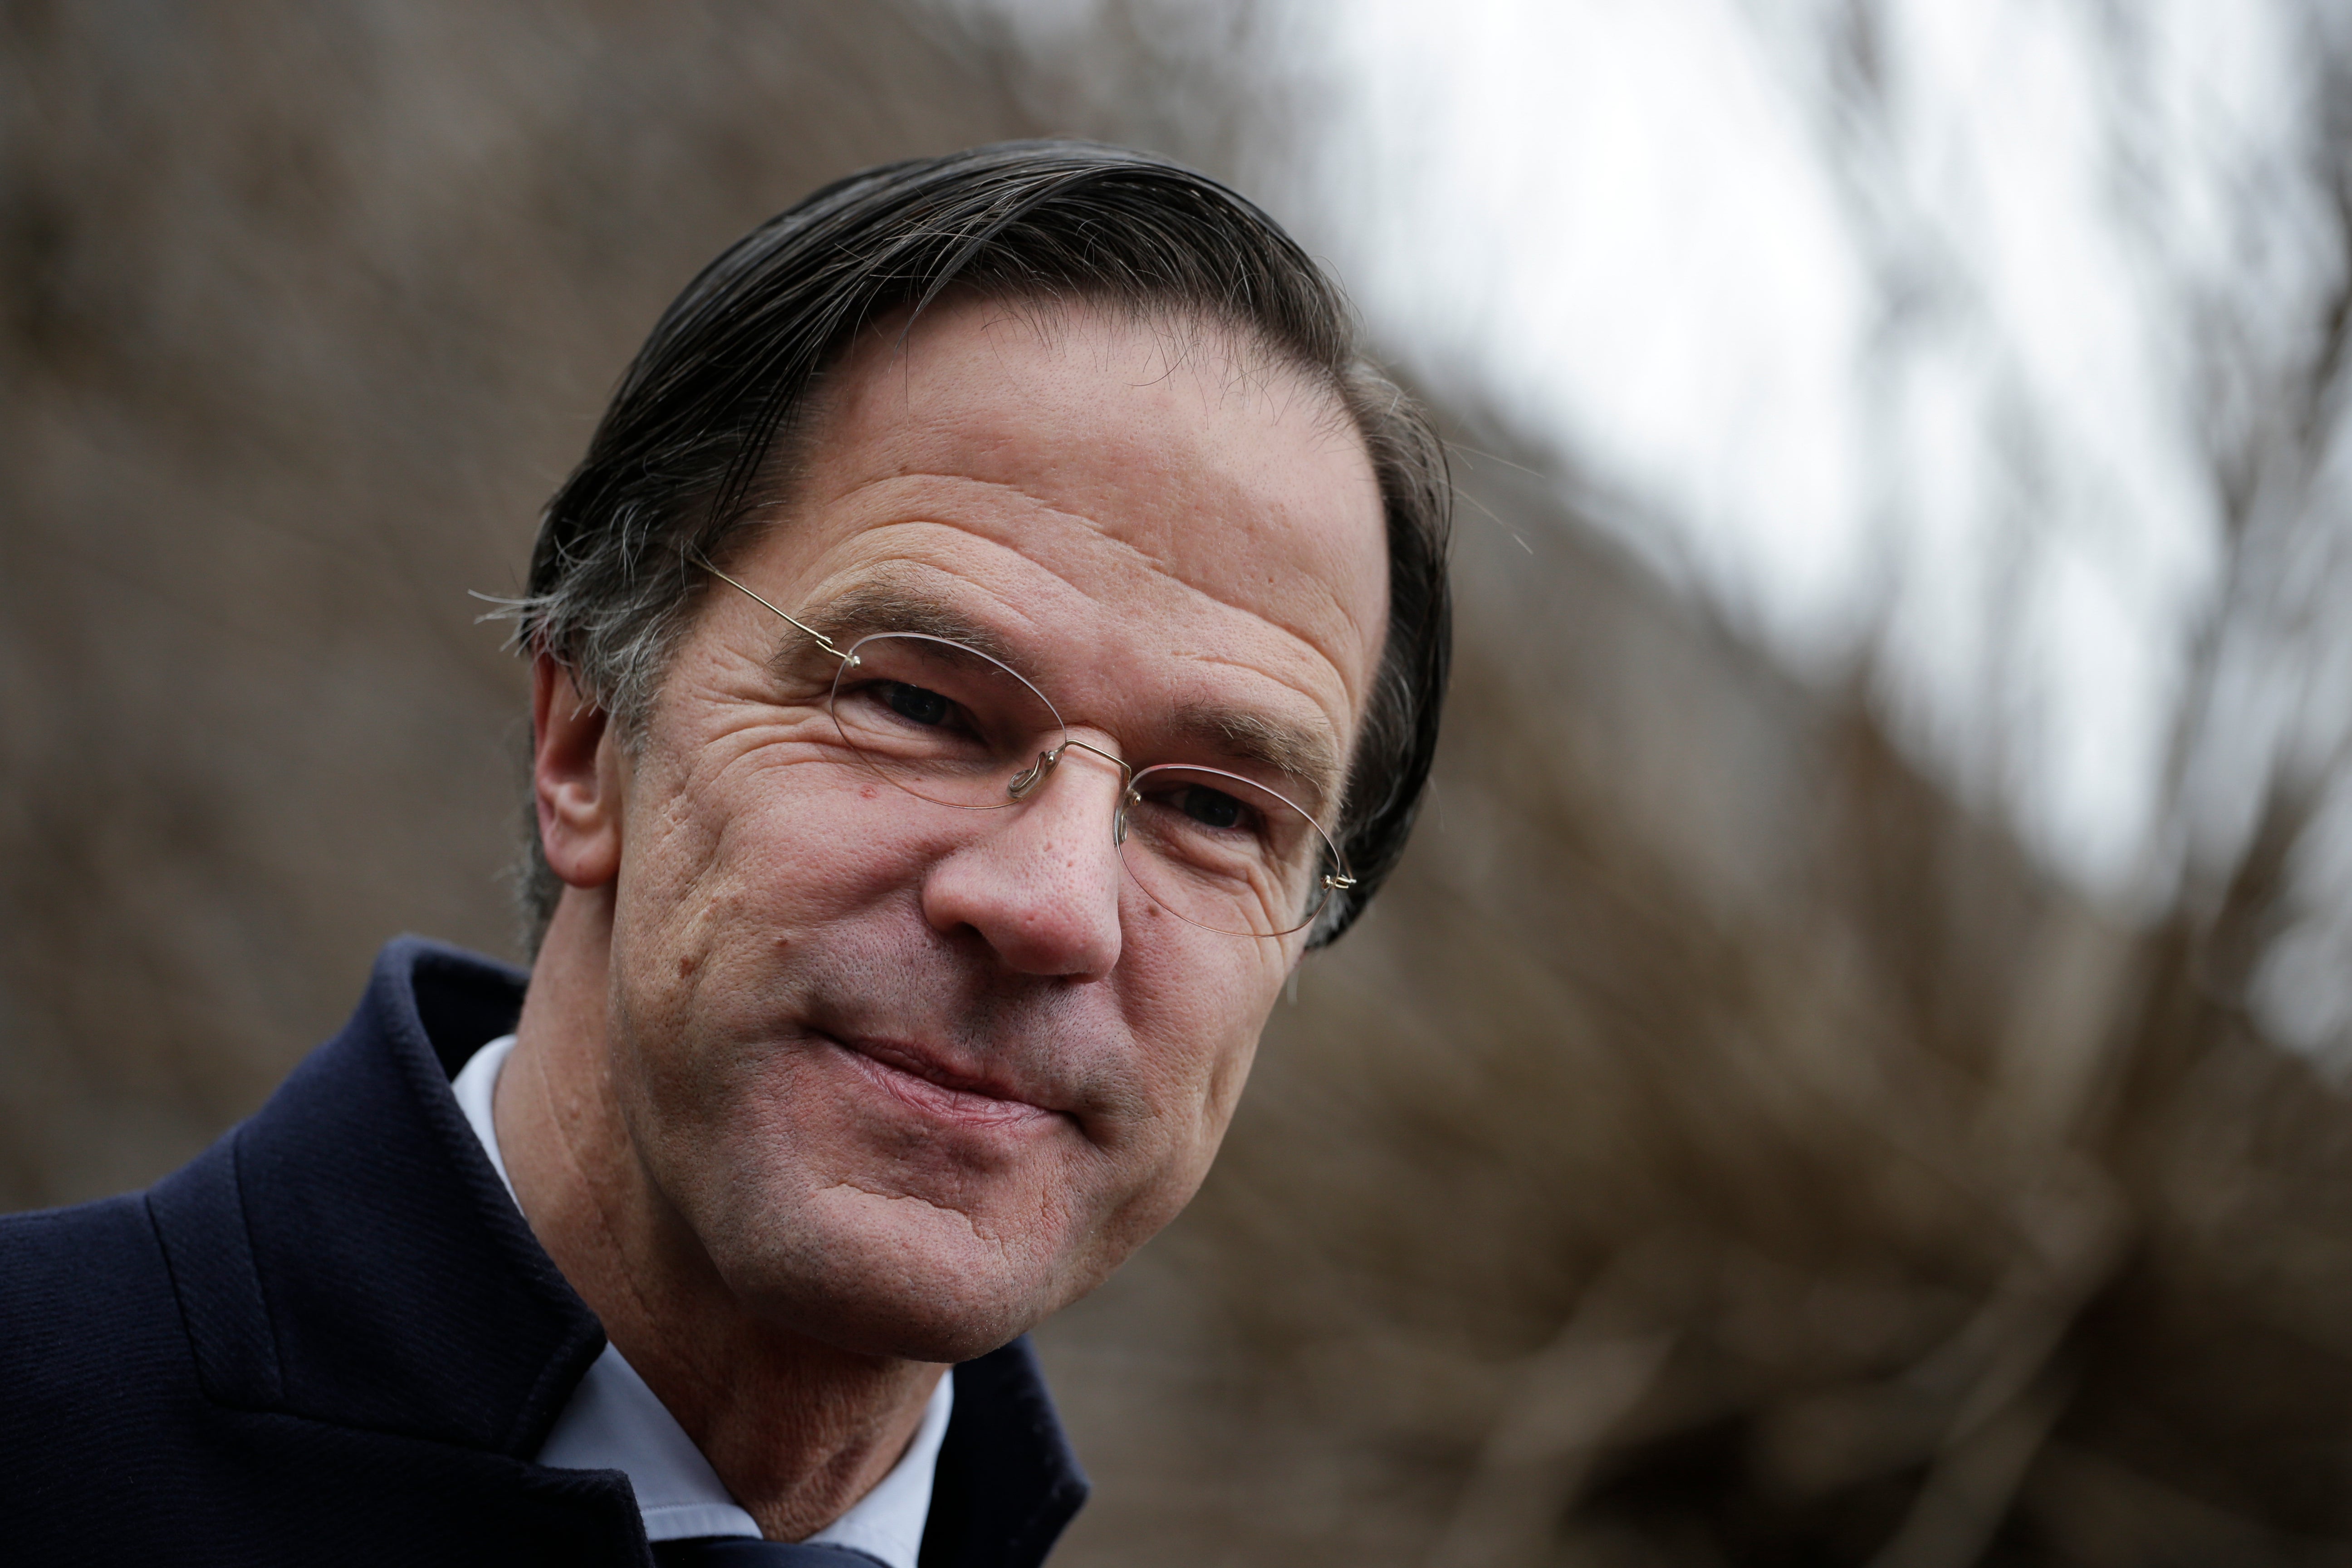 Prime Minister Mark Rutte said an heir to the throne can marry a person of the same-sex